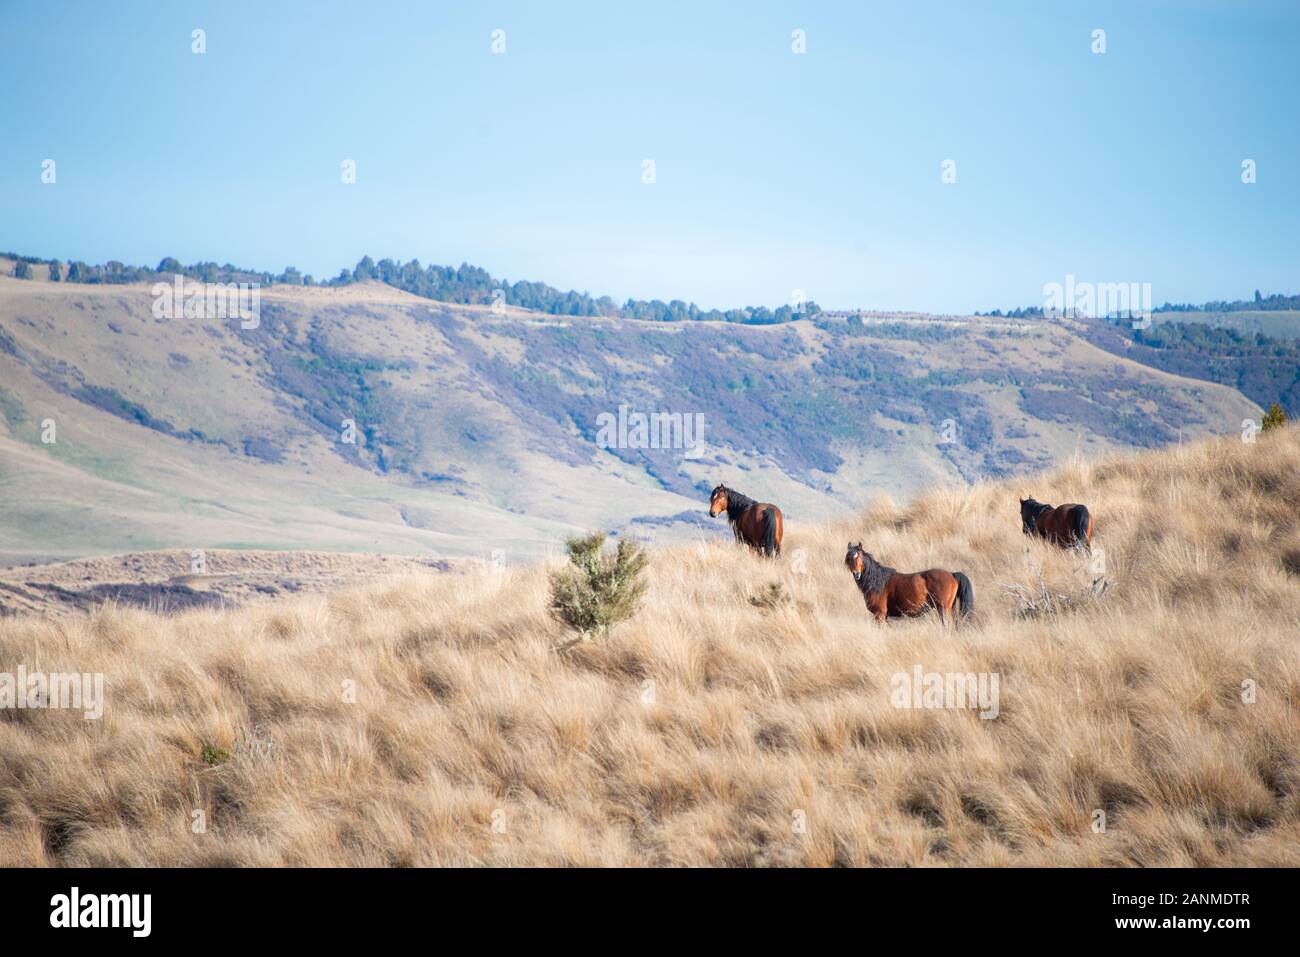 Kaimanawa horses on the hills of the mountain ranges, Central Plateau, North Island, New Zealand Stock Photo